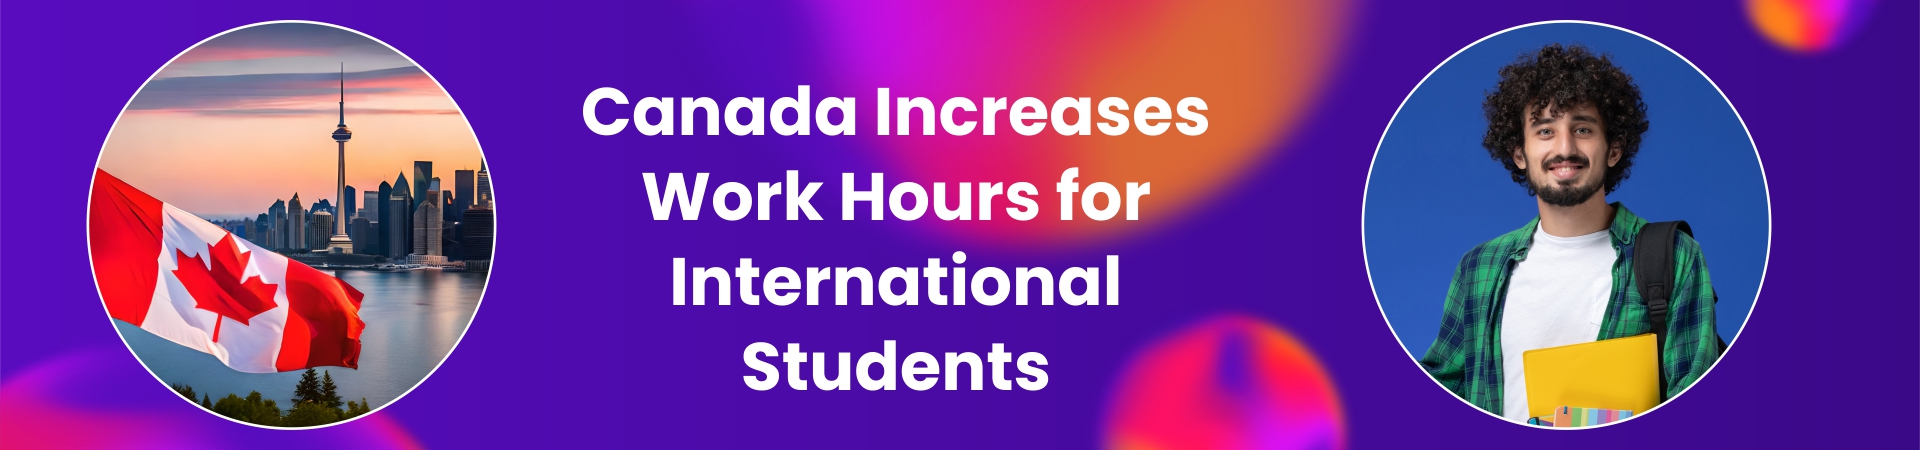 Canada Increases Work Hours for International Students